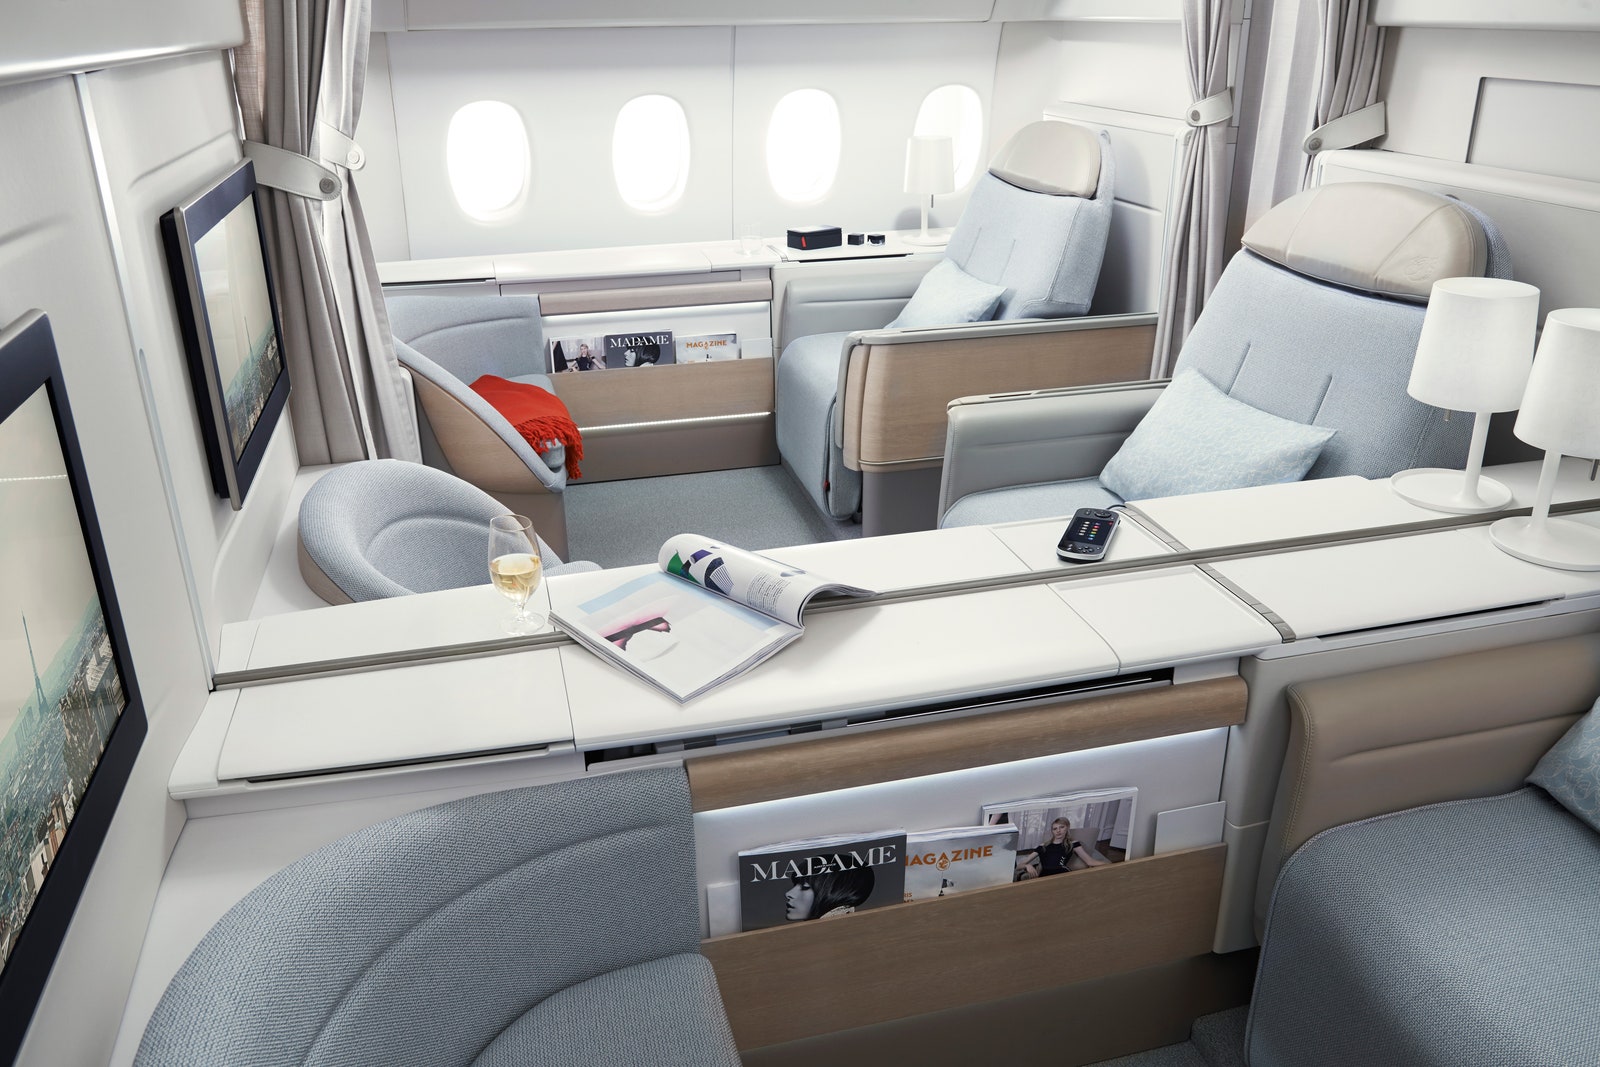 How to Get Upgraded to First Class: Use Oversold Flights to Your Advantage